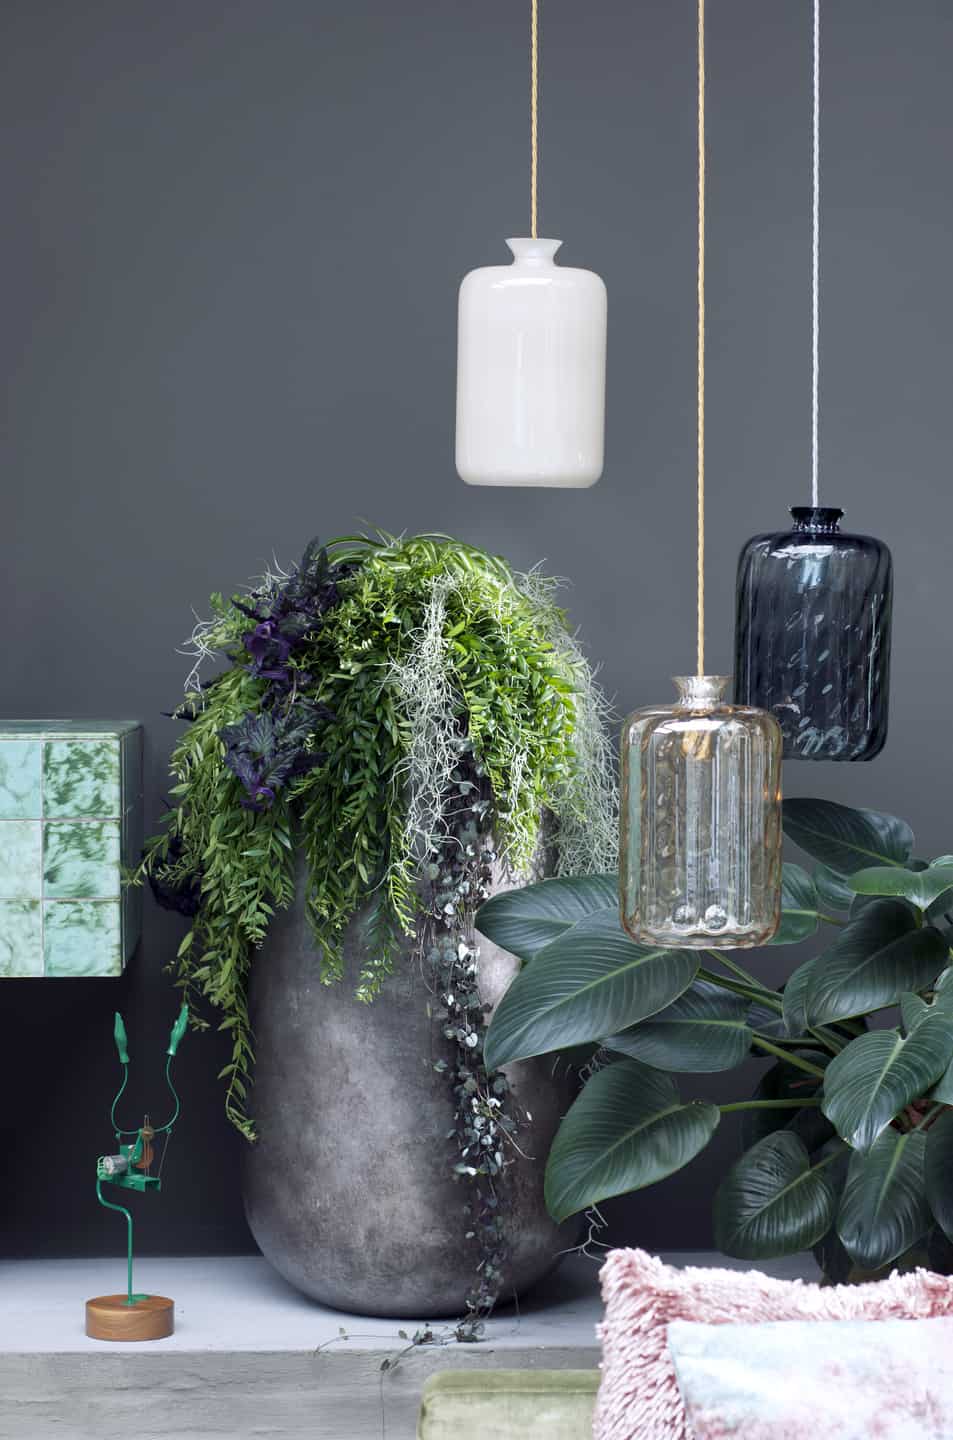 Hanging plants in decor